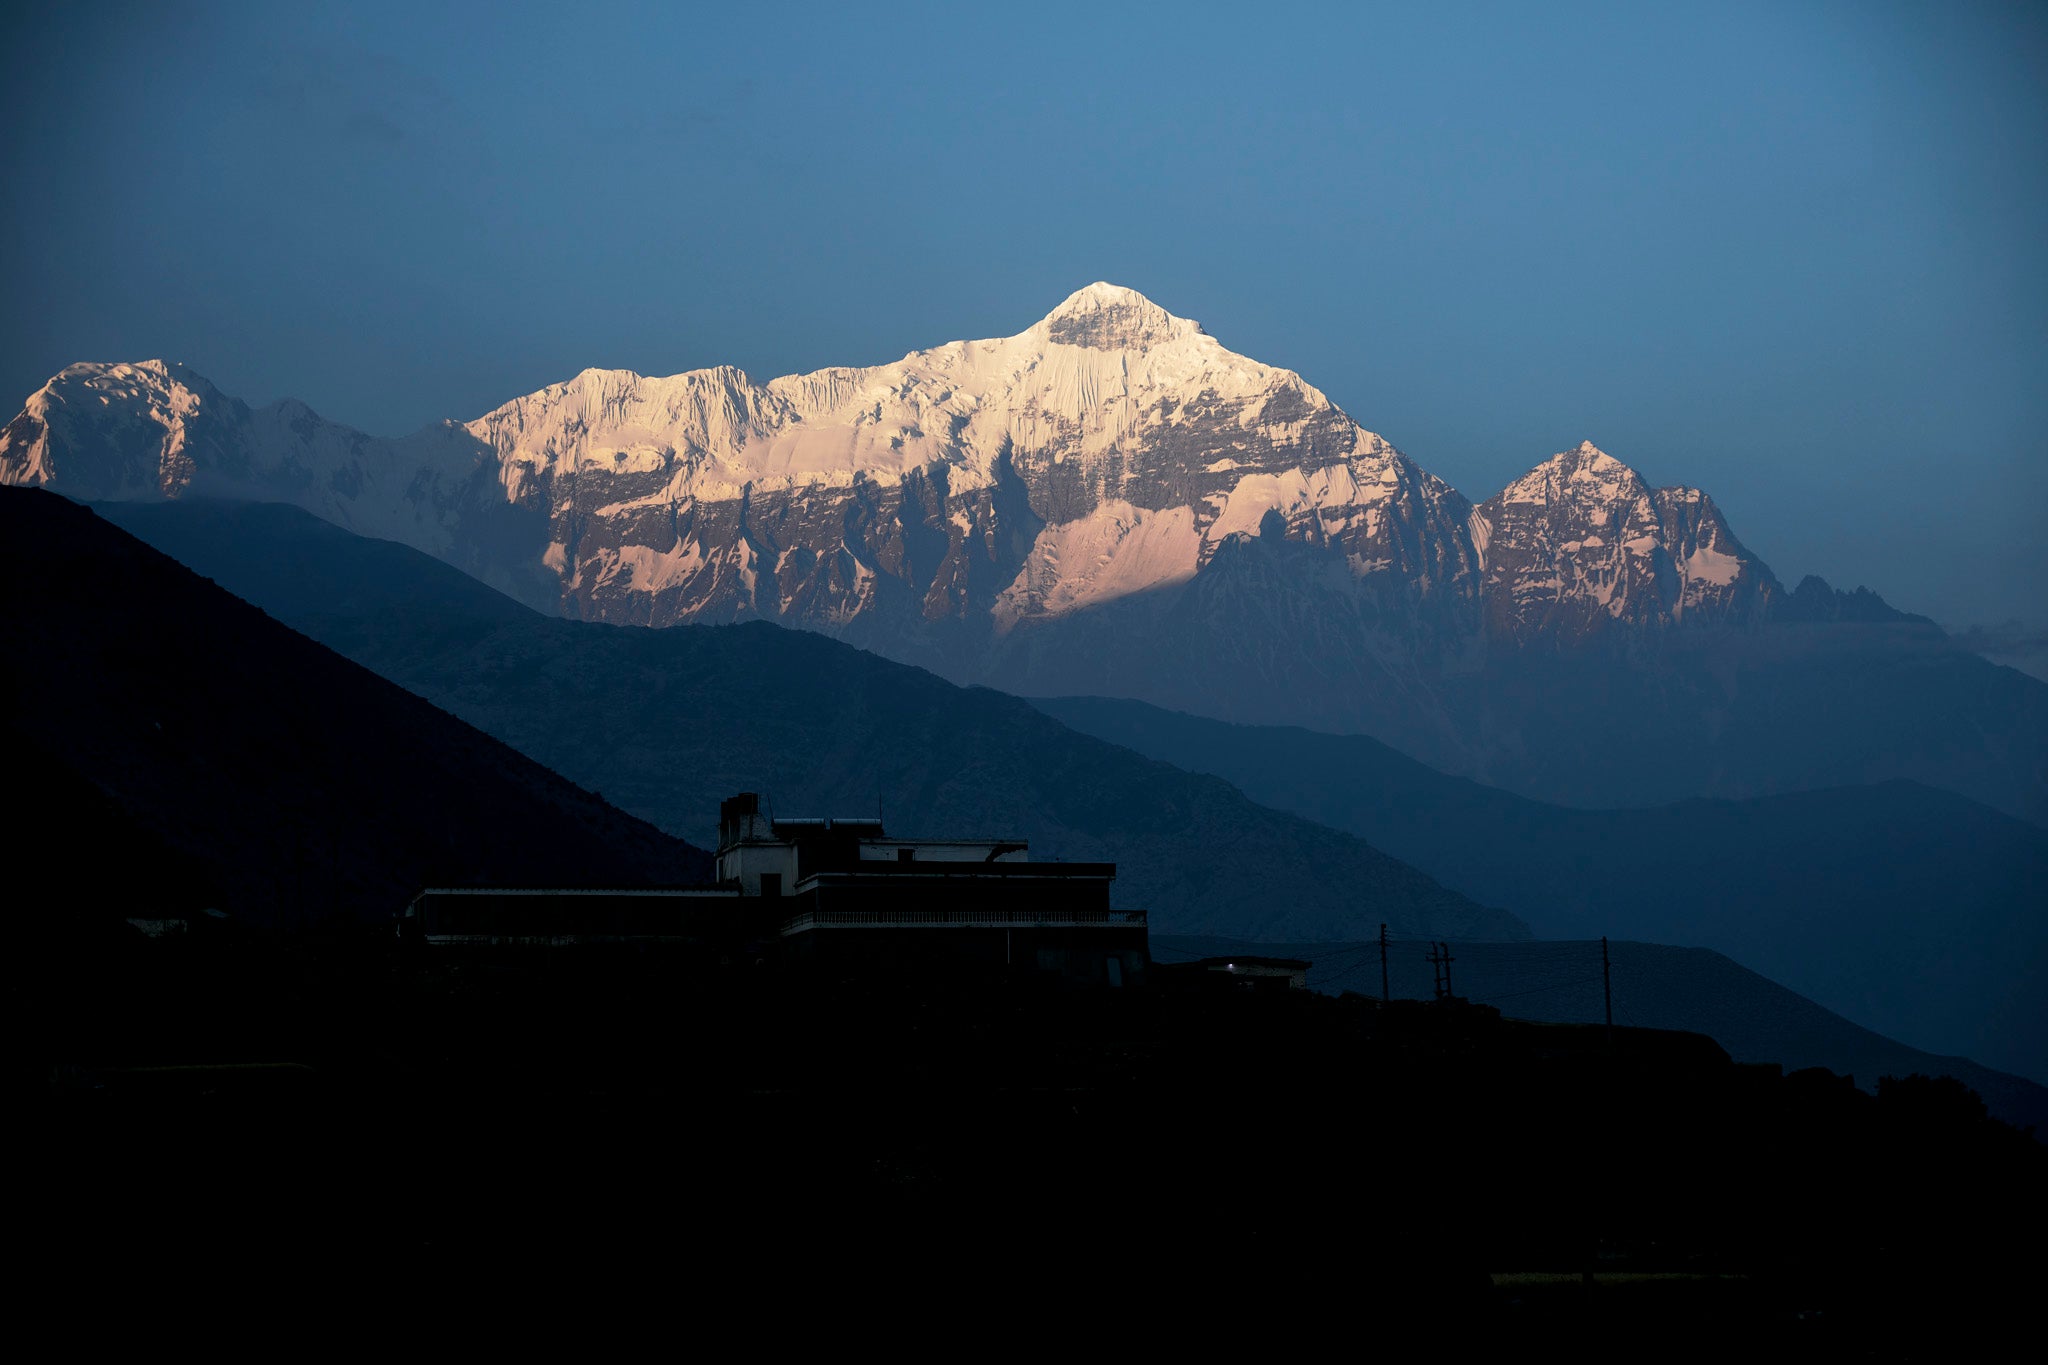 Annapurna Base Camp in the Nepalese Himalayas has for the past 40 years witnessed the mean temperature rise from 0.9C to 2.5C